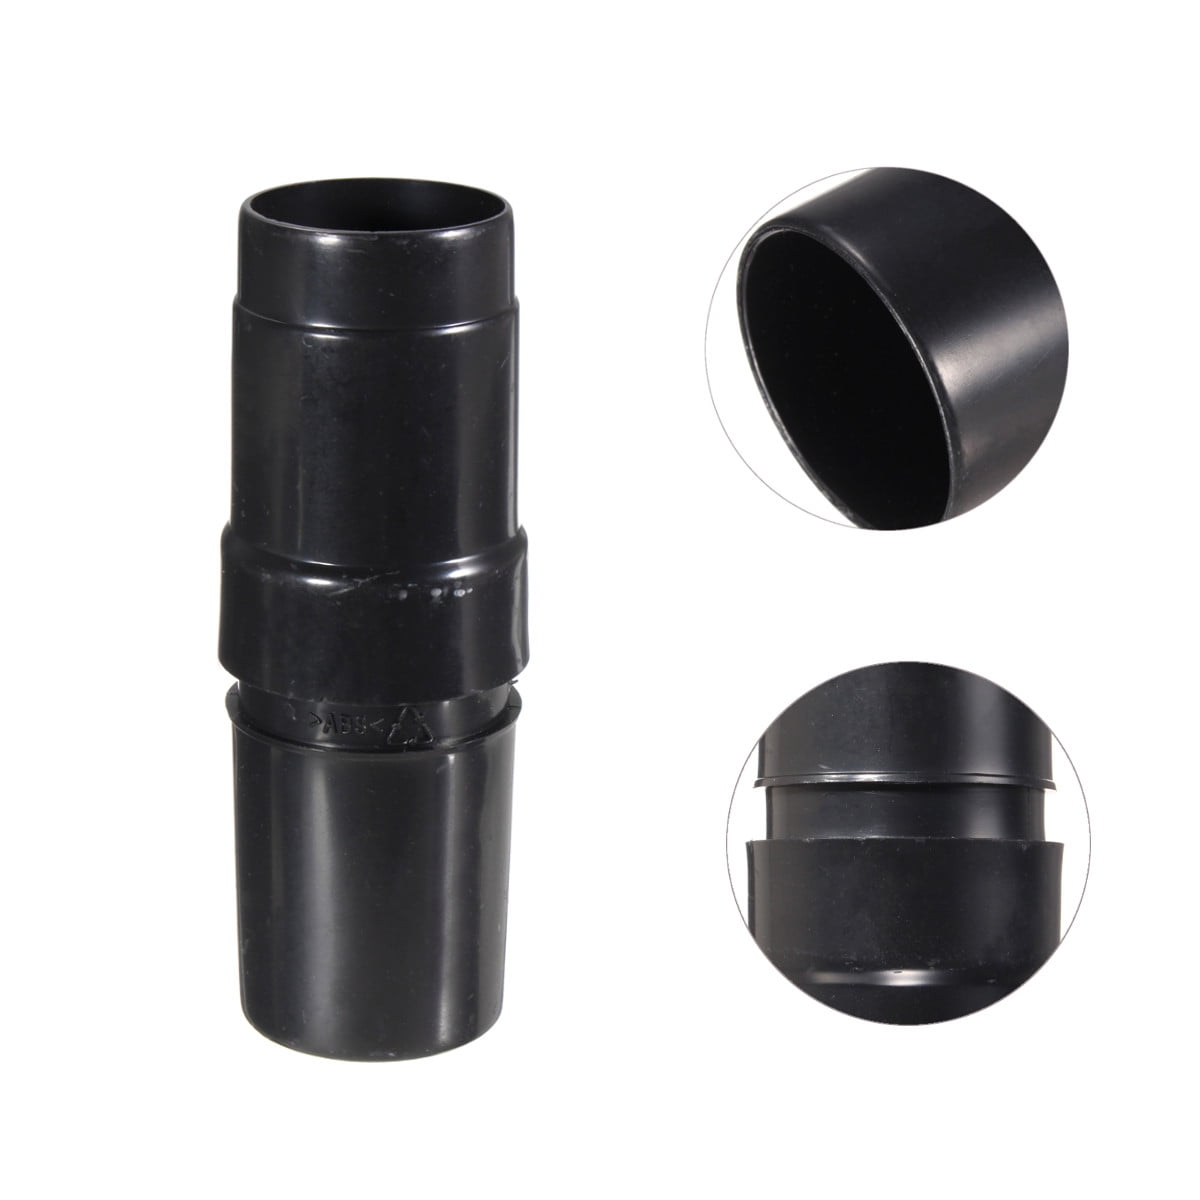 28mm-32mm Plastic ABS Converter Attachment Hose Adapter For Vacuum Cleaner 